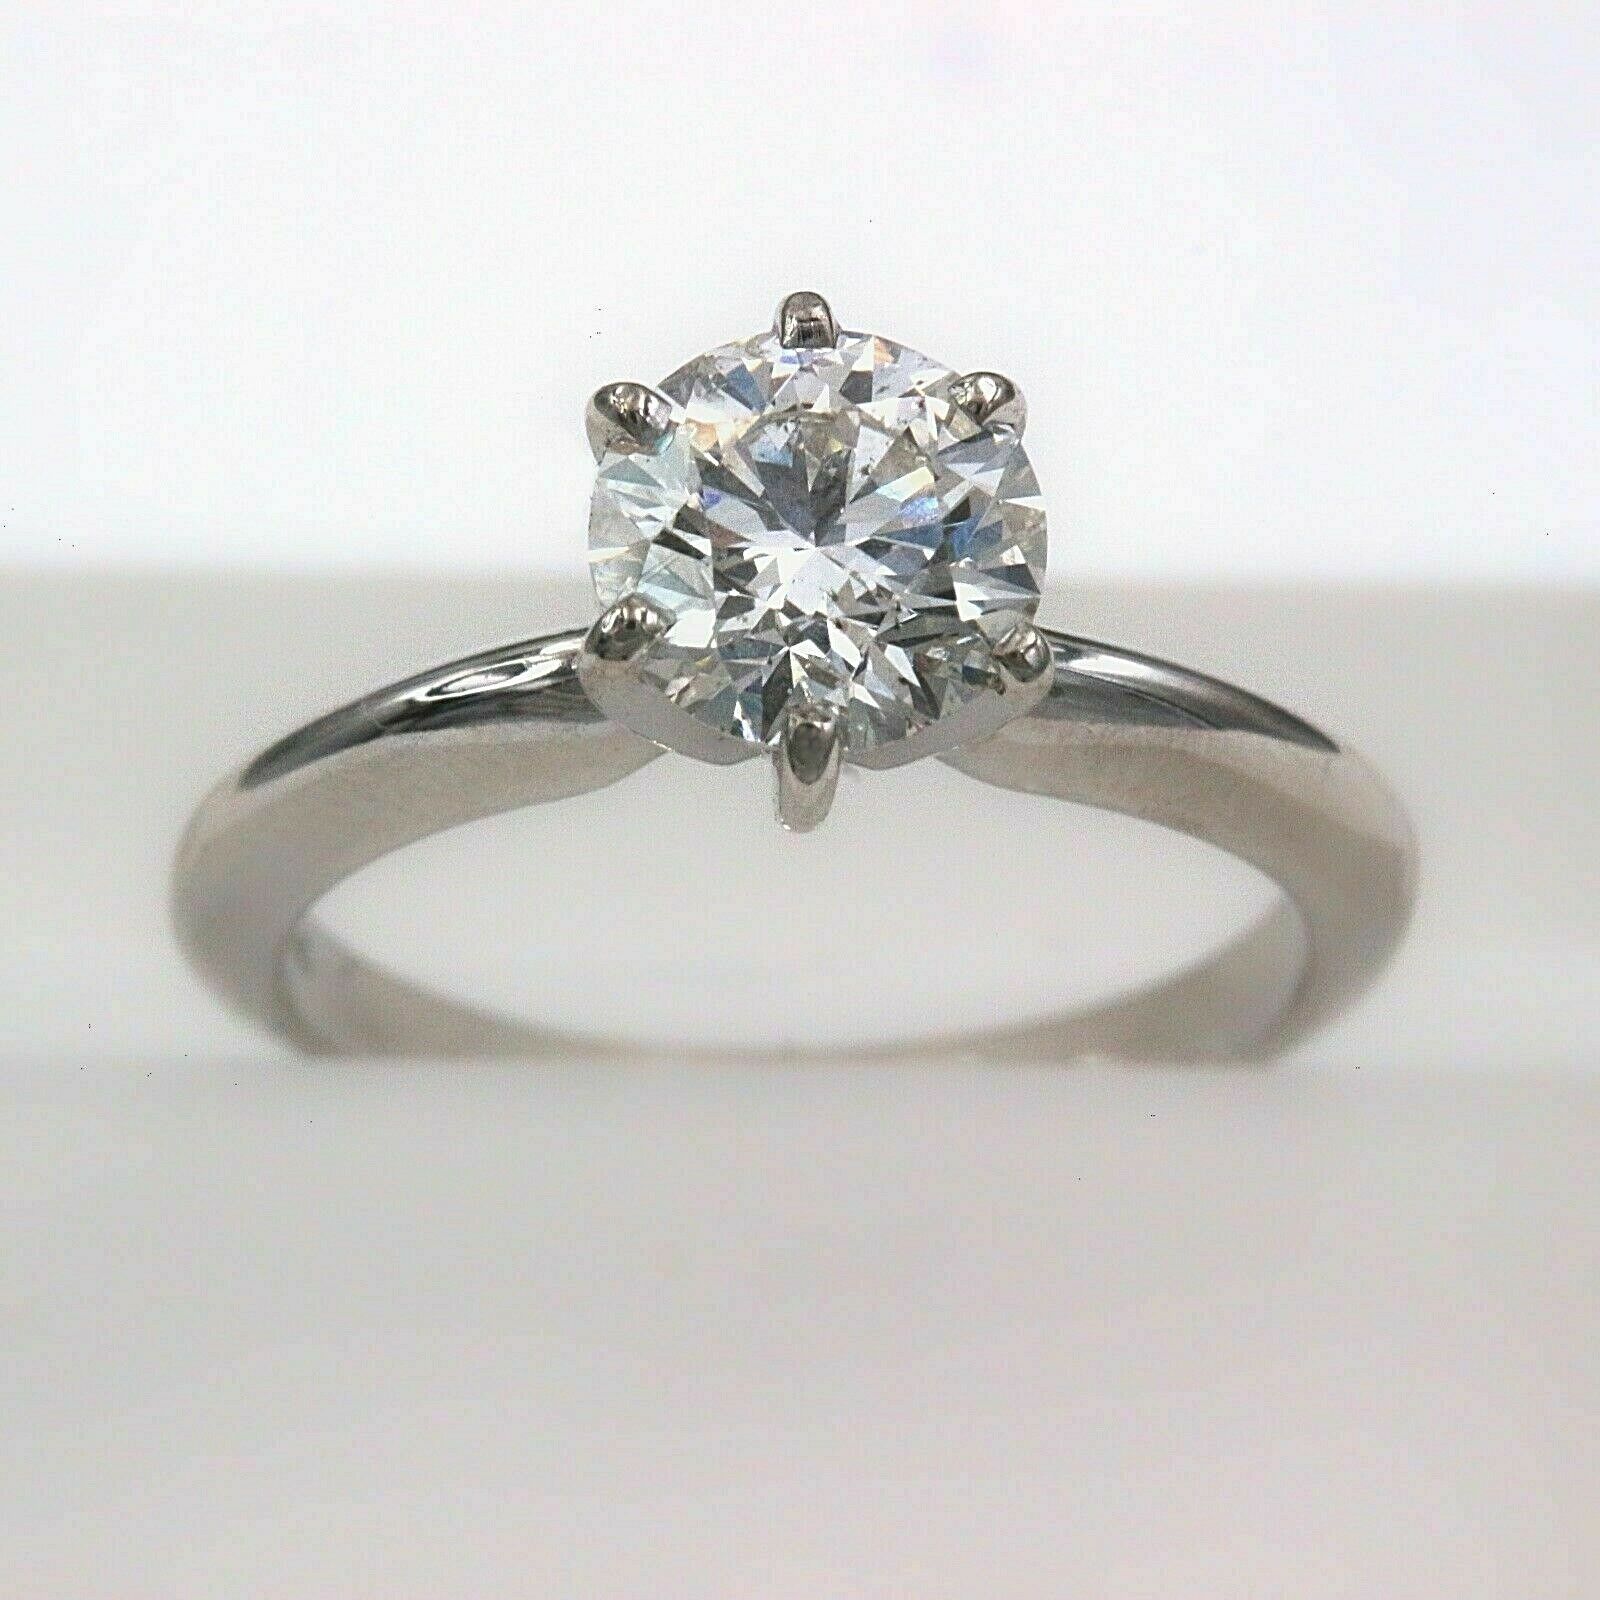 What types of diamond cuts are best for my engagement ring? | BriteCo  Jewelry Insurance